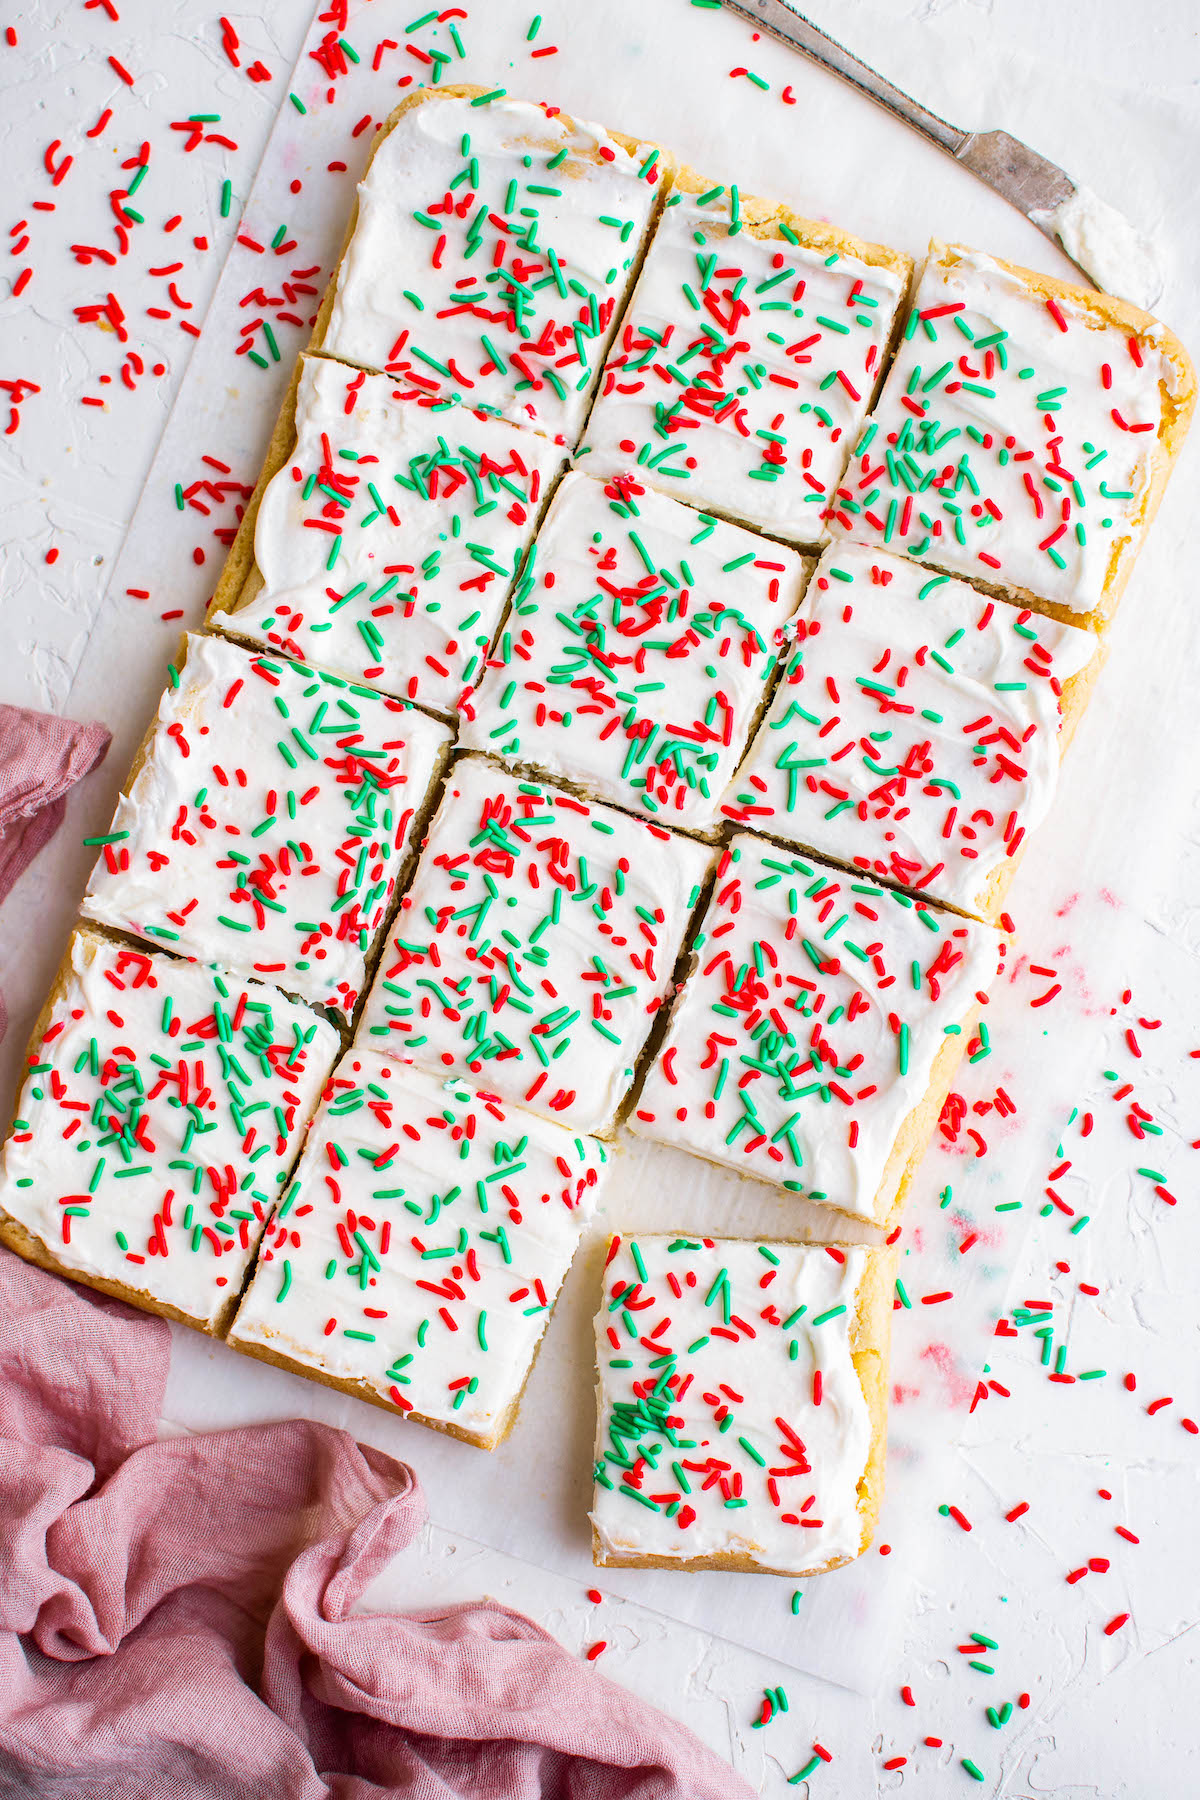 Overhead view of sugar cookie bars with white icing and red and green sprinkles.